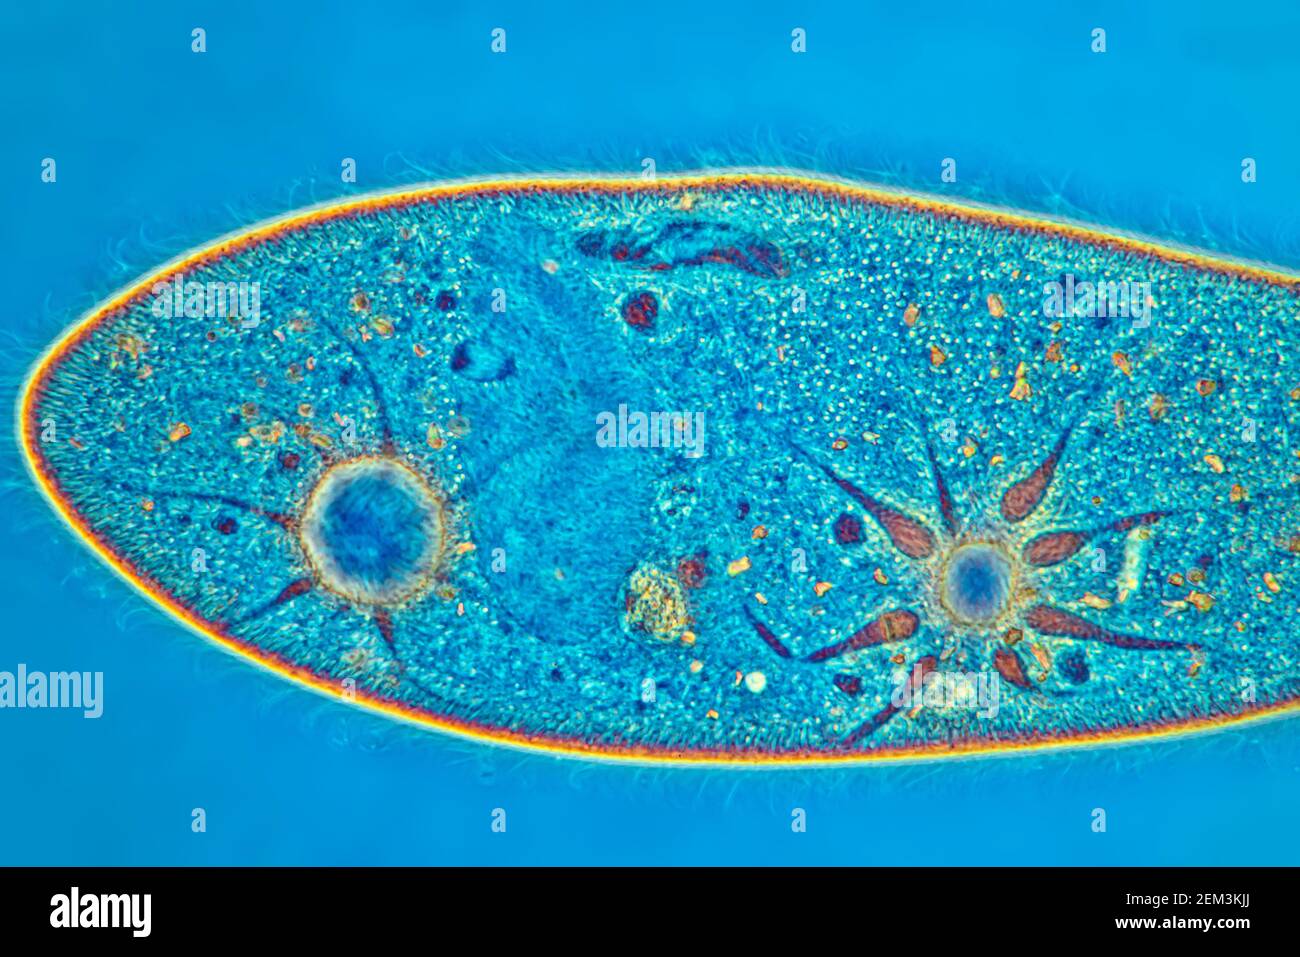 slipper animalcules (Paramecium caudatum), phase-contrast MRI image, magnification x120 related to 35mm, Germany Stock Photo